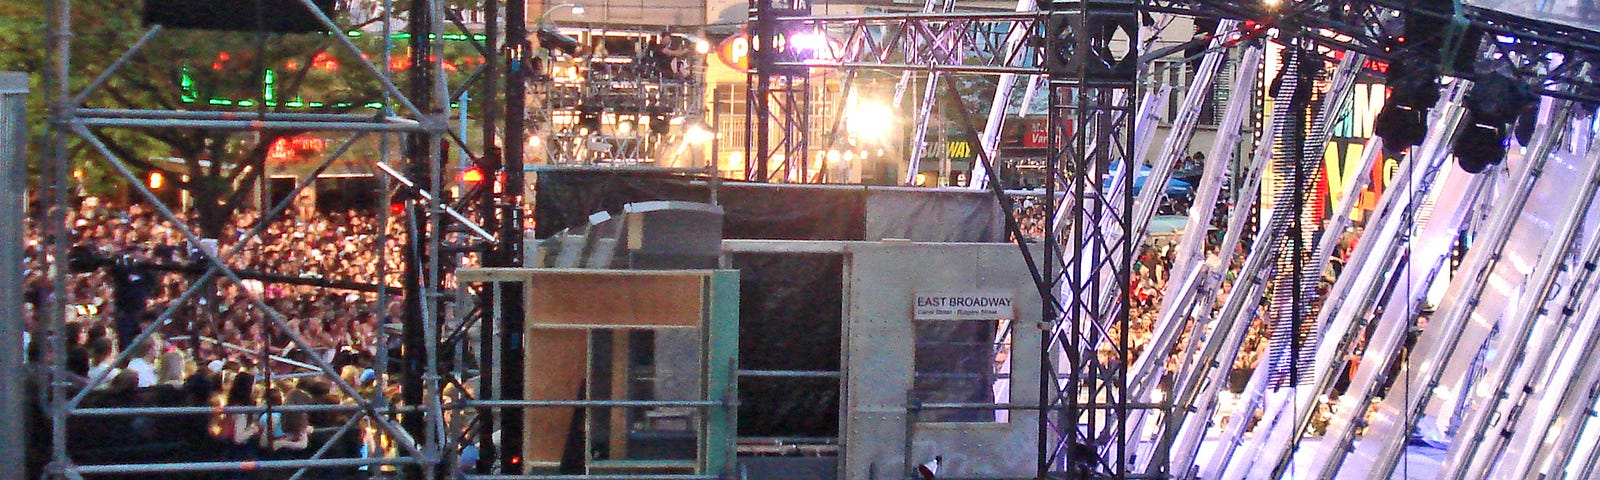 Backstage of an outdoor concert. Scaffolding and a lighting grid are visible in the foreground, stairs lead up to a small room where performers can wait. A huge crowd of people is visible in the background.